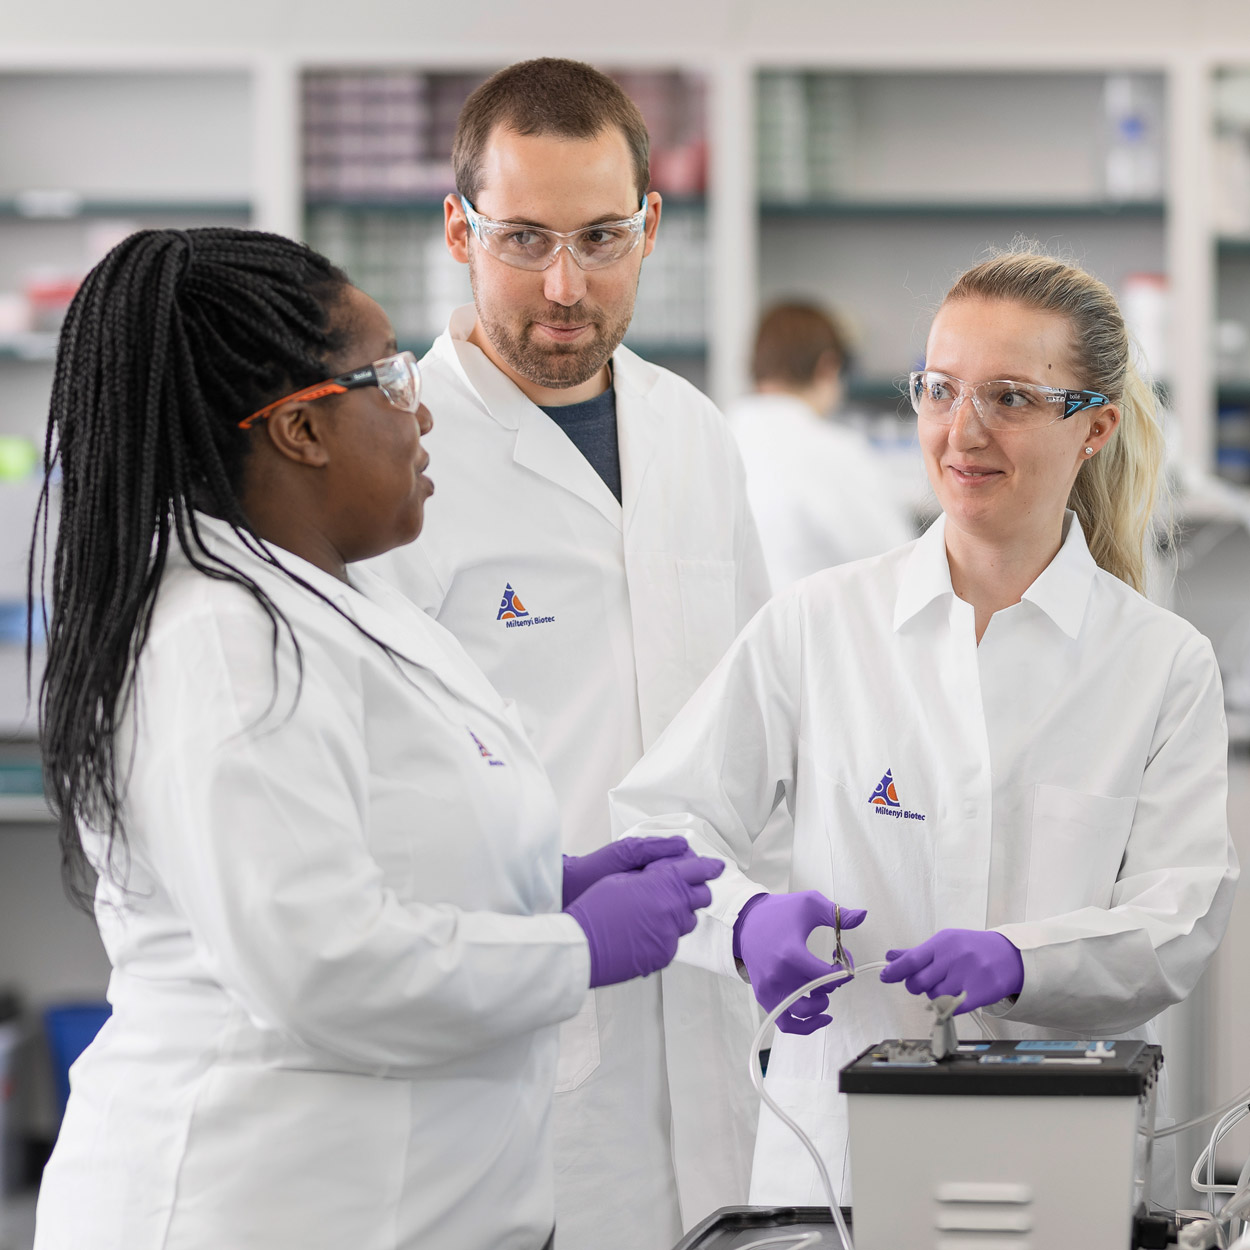 Three people in lab attire in discussion in a lab.